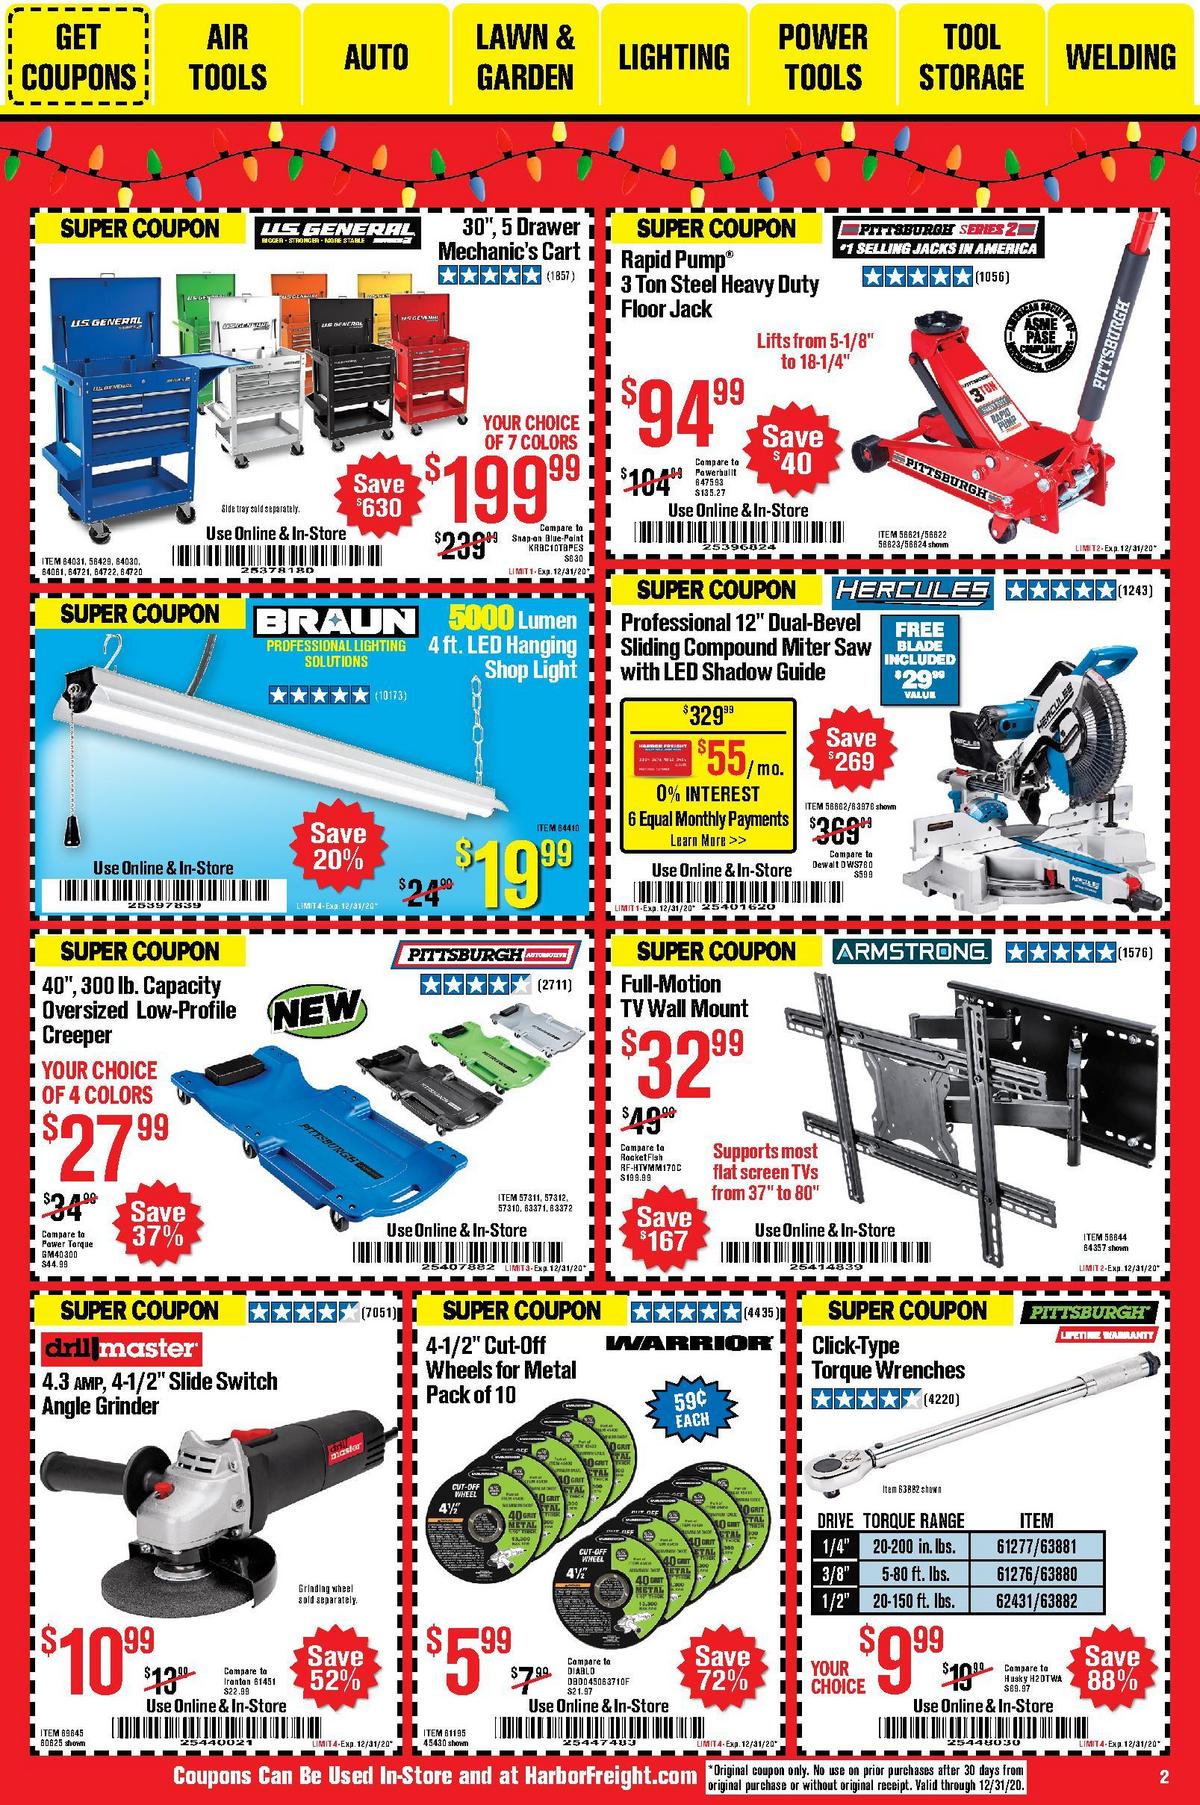 Harbor Freight Tools Best Offers & Special Buys from December 1 Page 2